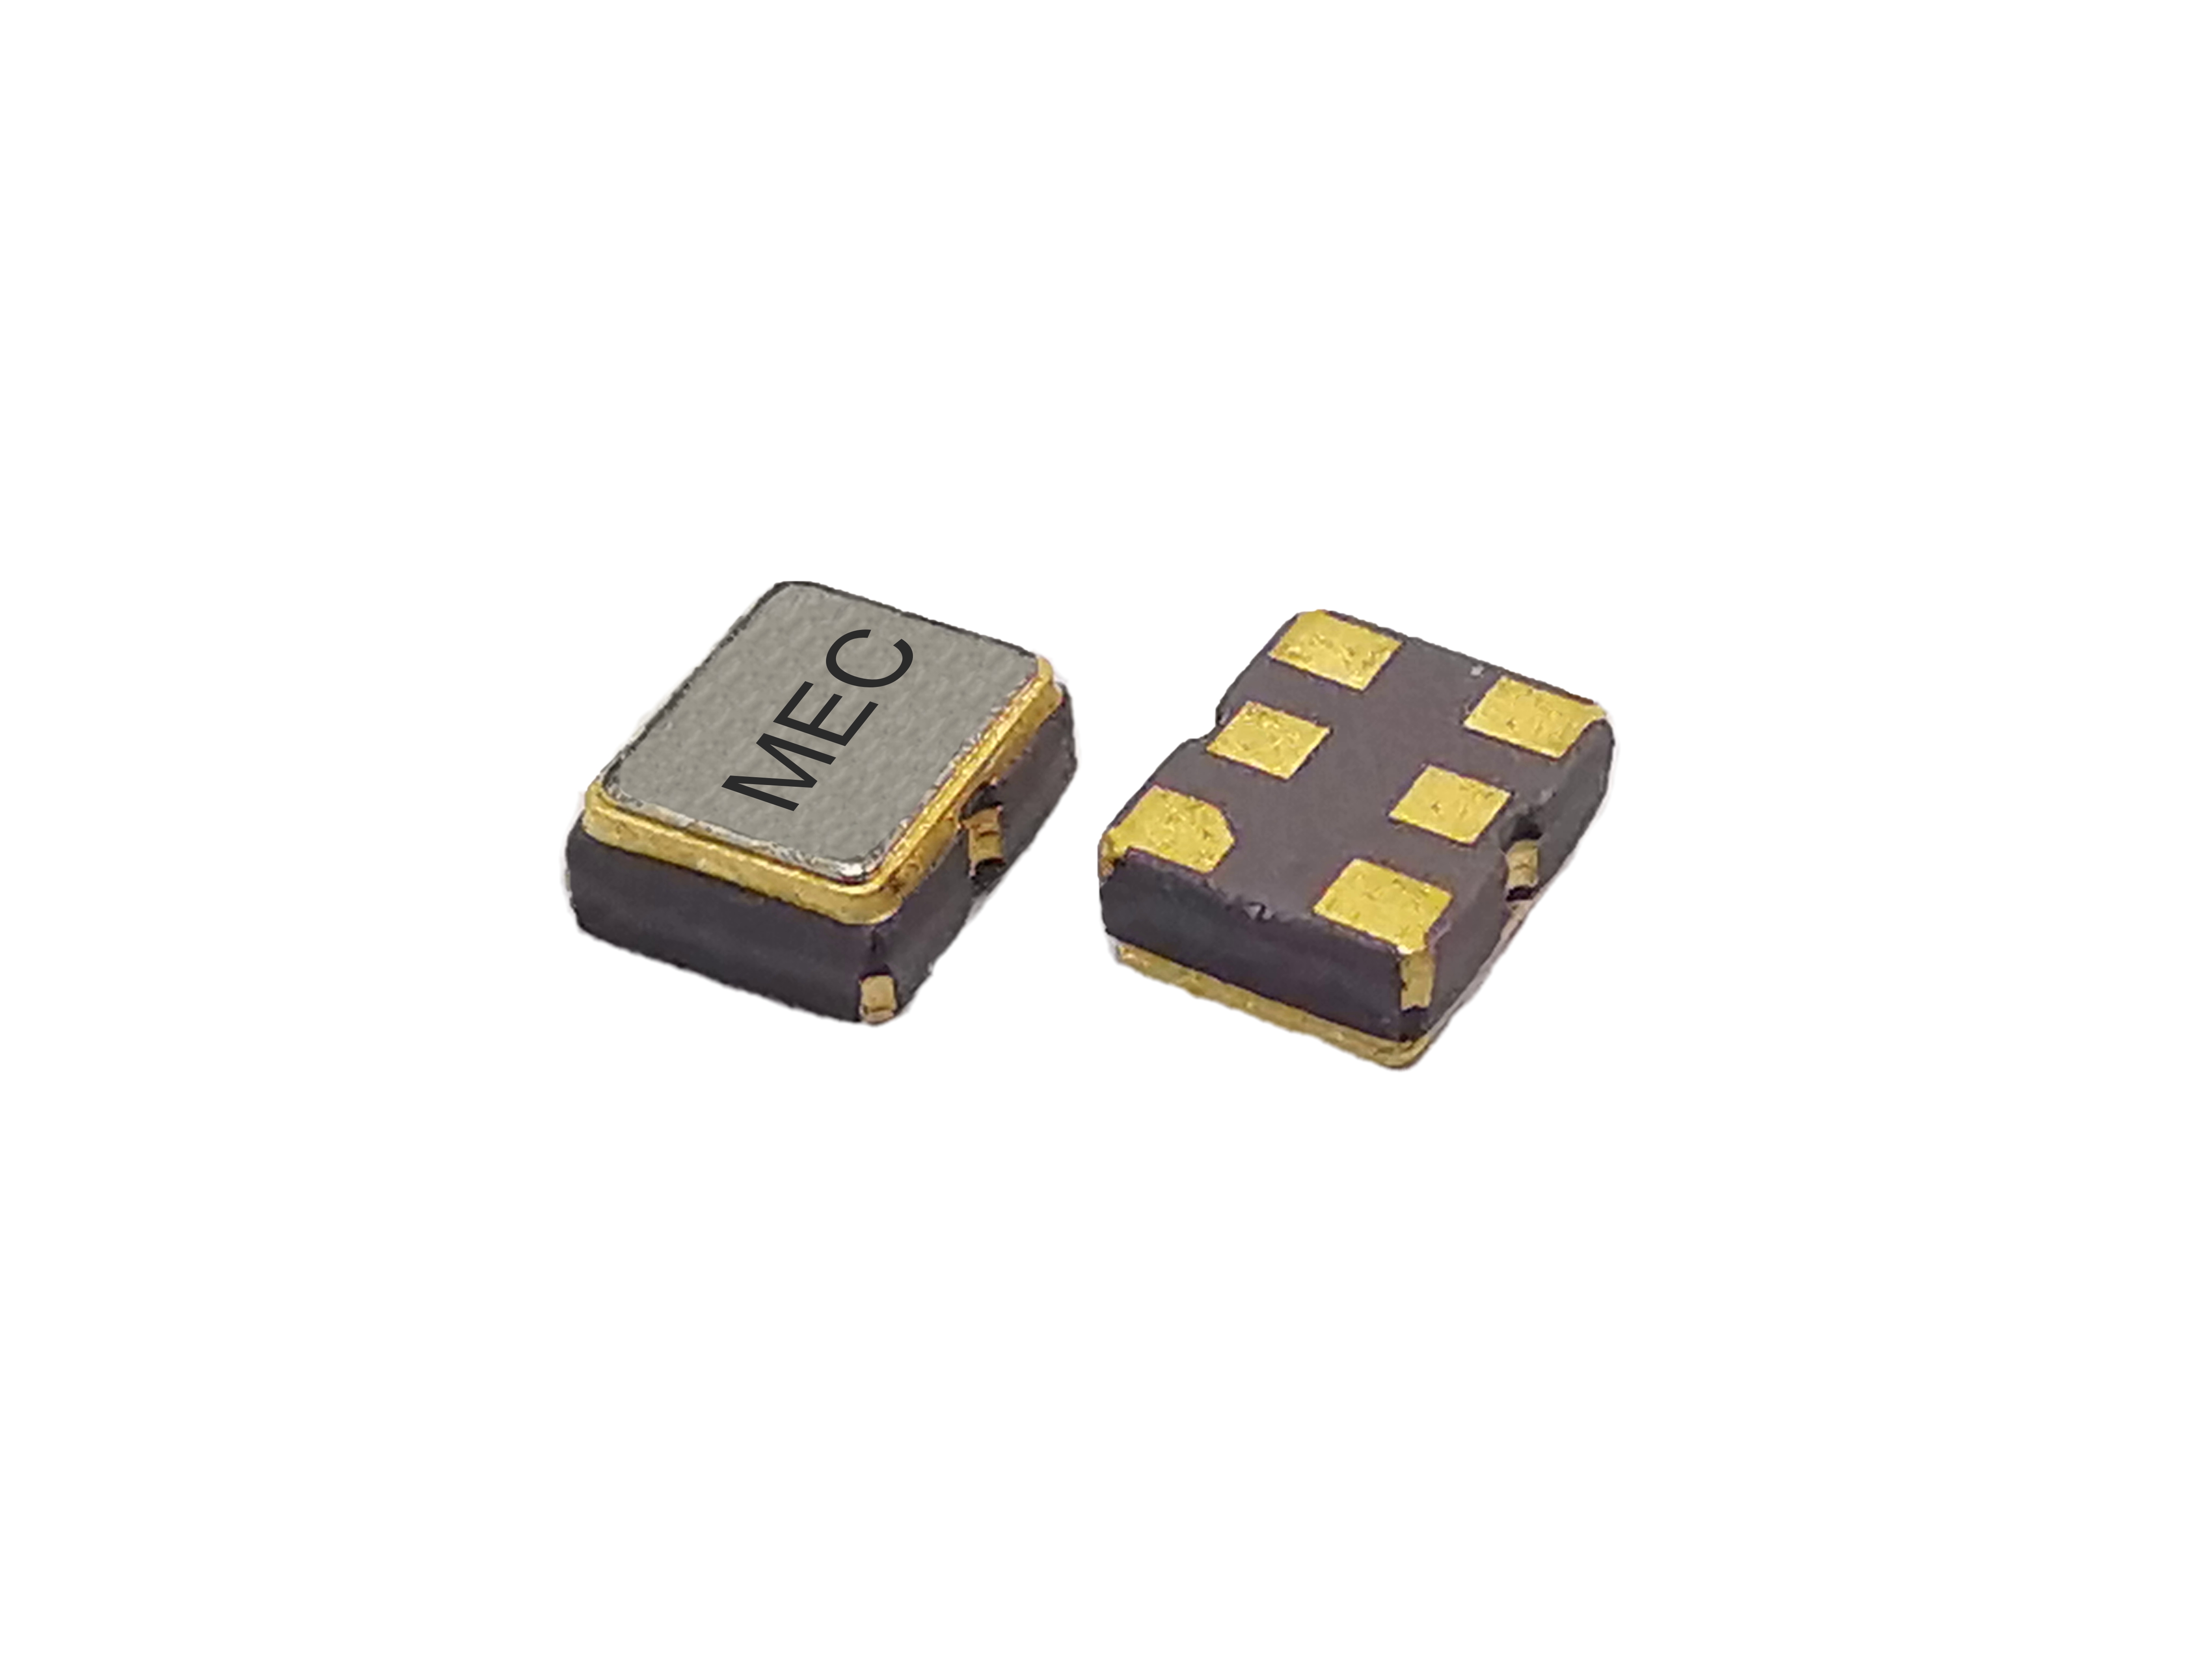 HCK226 2520 2.5V Differential With No PLL HCSL SMD Crystal Oscillator